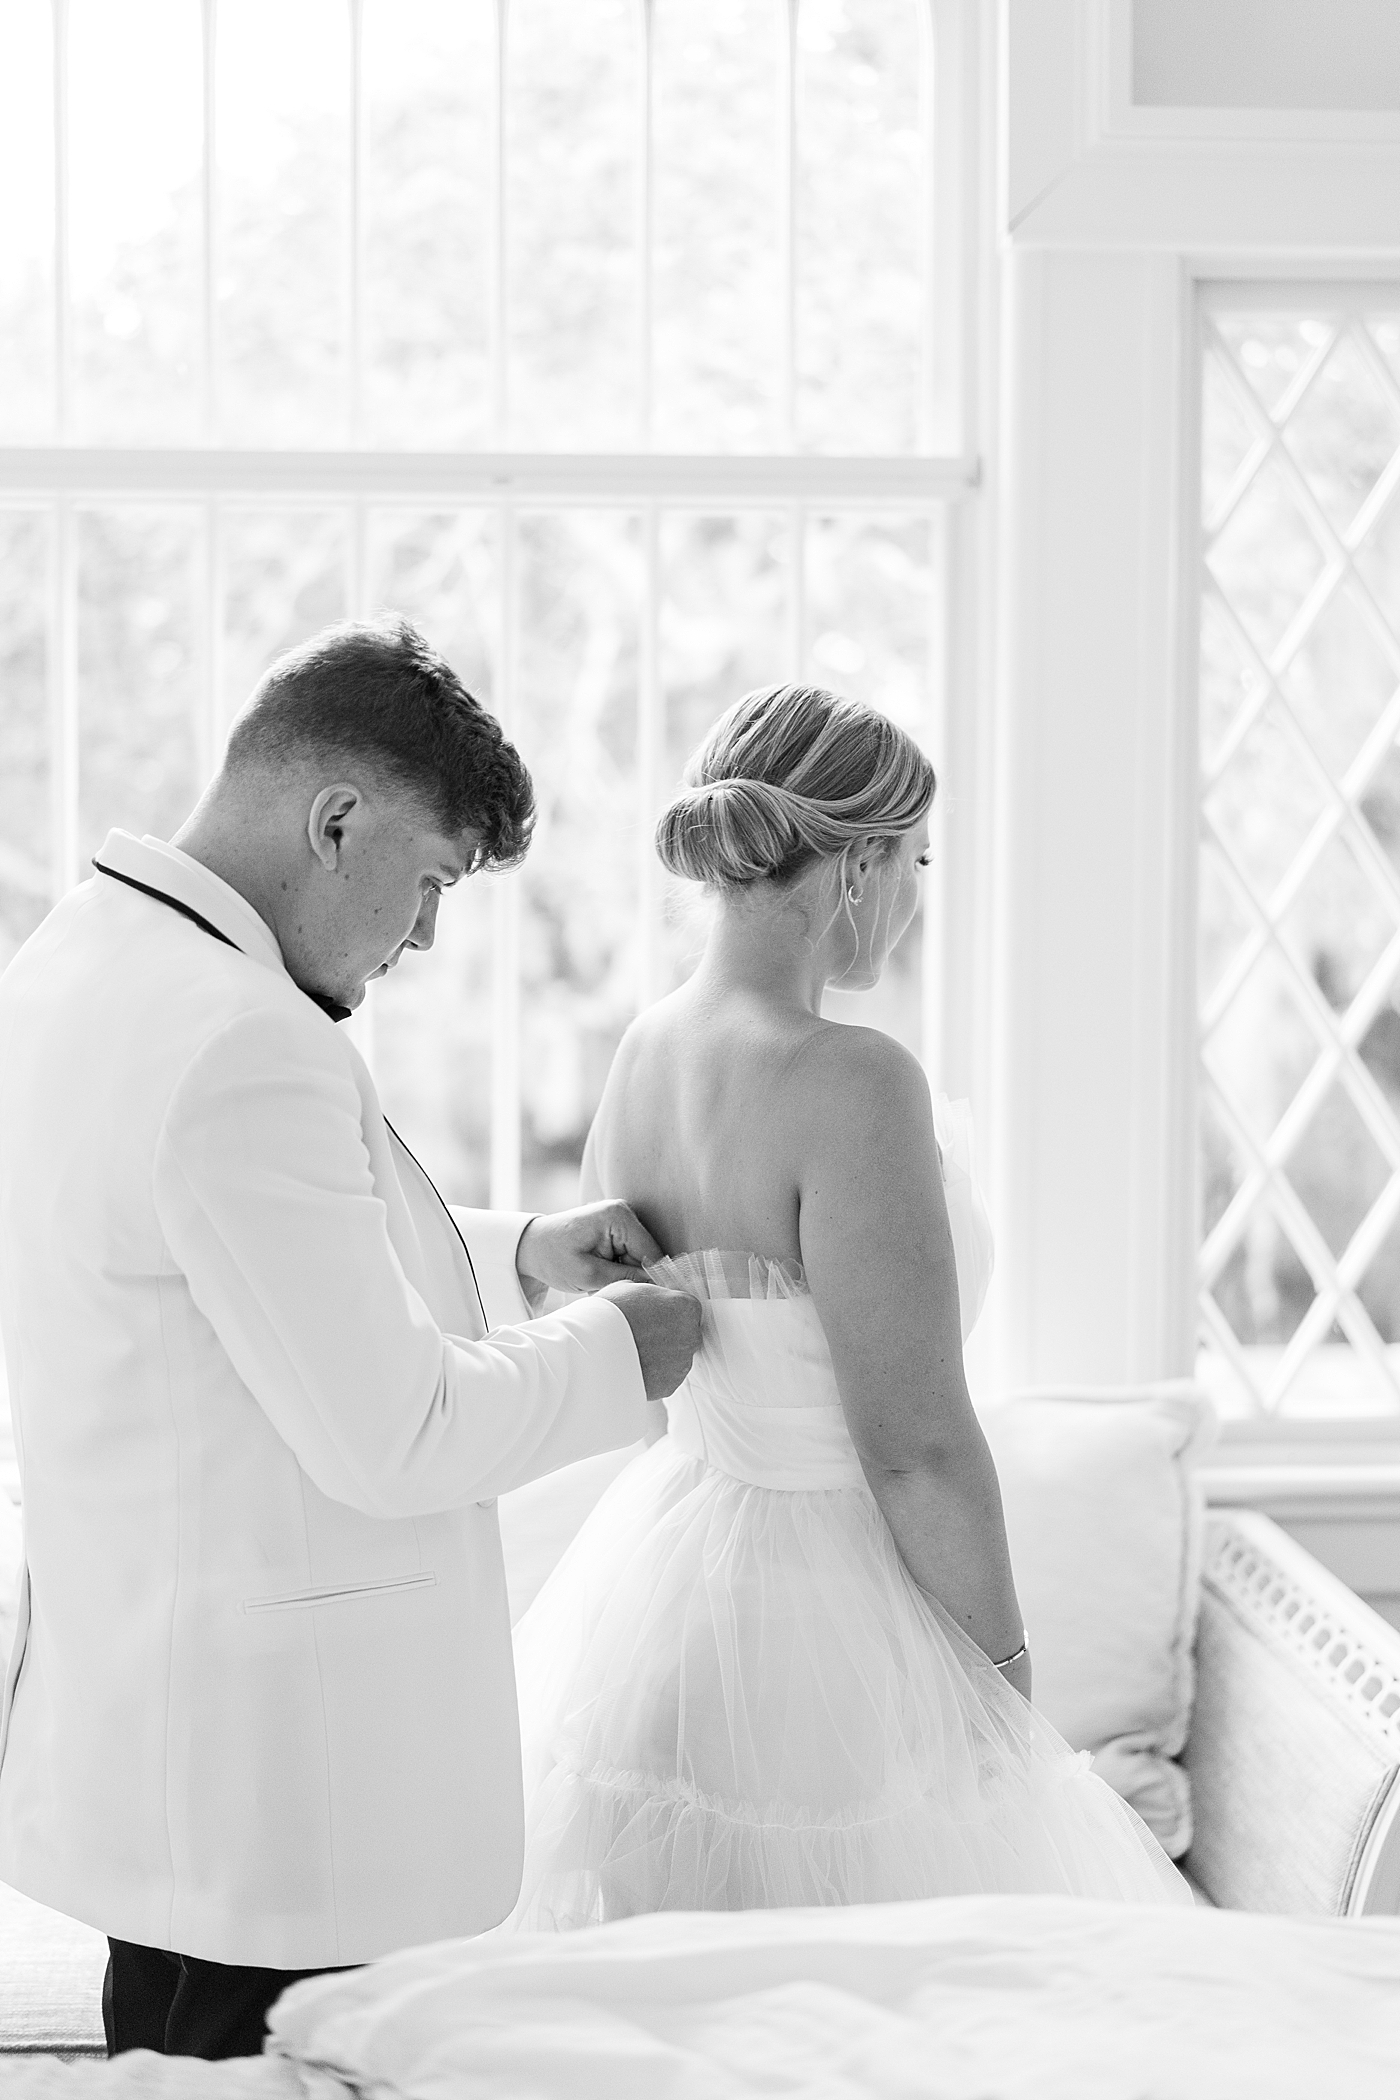 Groom zipping brides dress for reception | Images by Annie Laura Photography